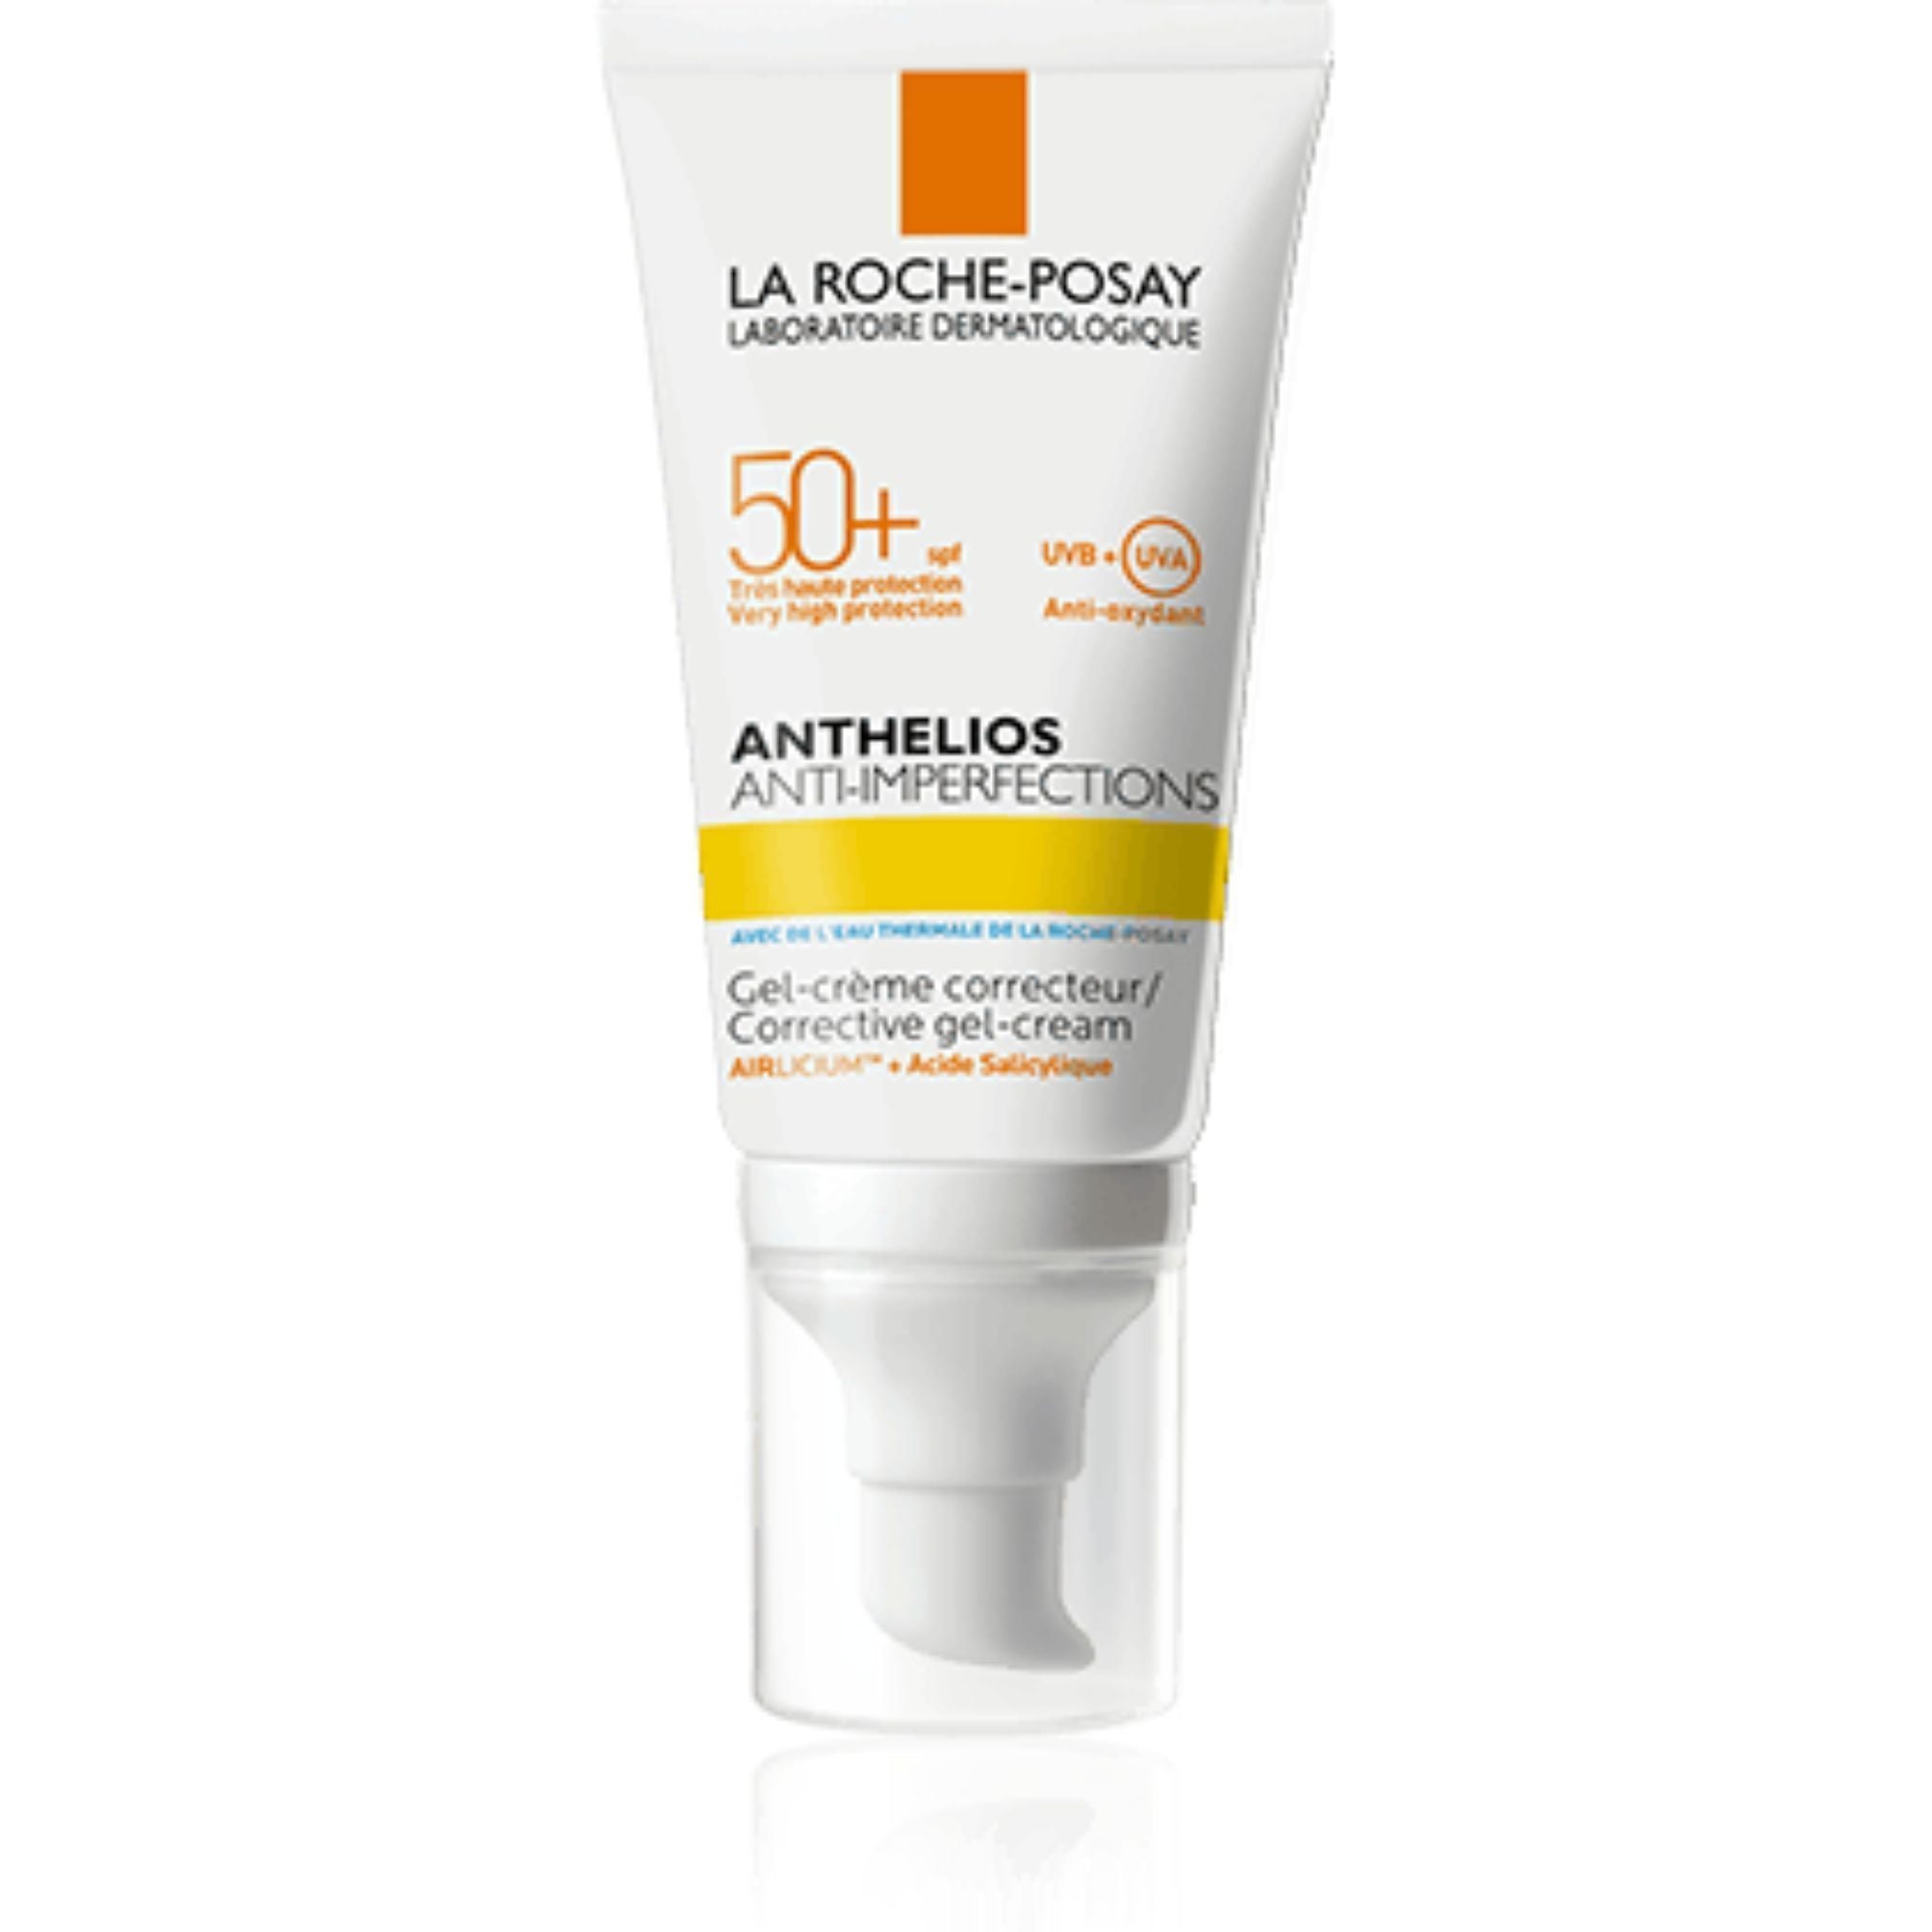 La Roche-Posay Anthelios Anti-Imperfections FPS50+ 50ml